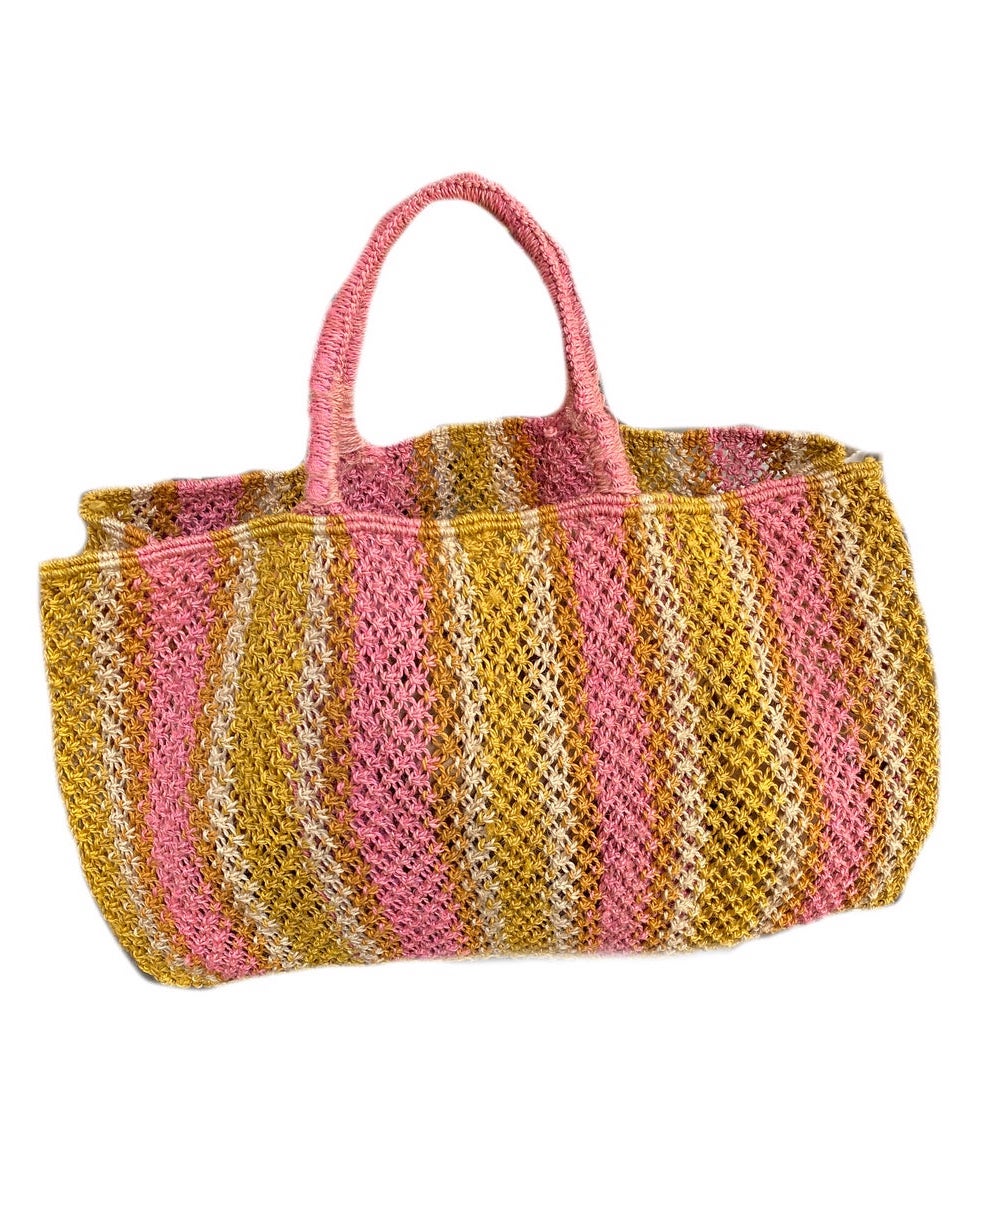 YELLOW NATURAL HONEY PICNIC LARGE JUTE TOTE - Kingfisher Road - Online Boutique